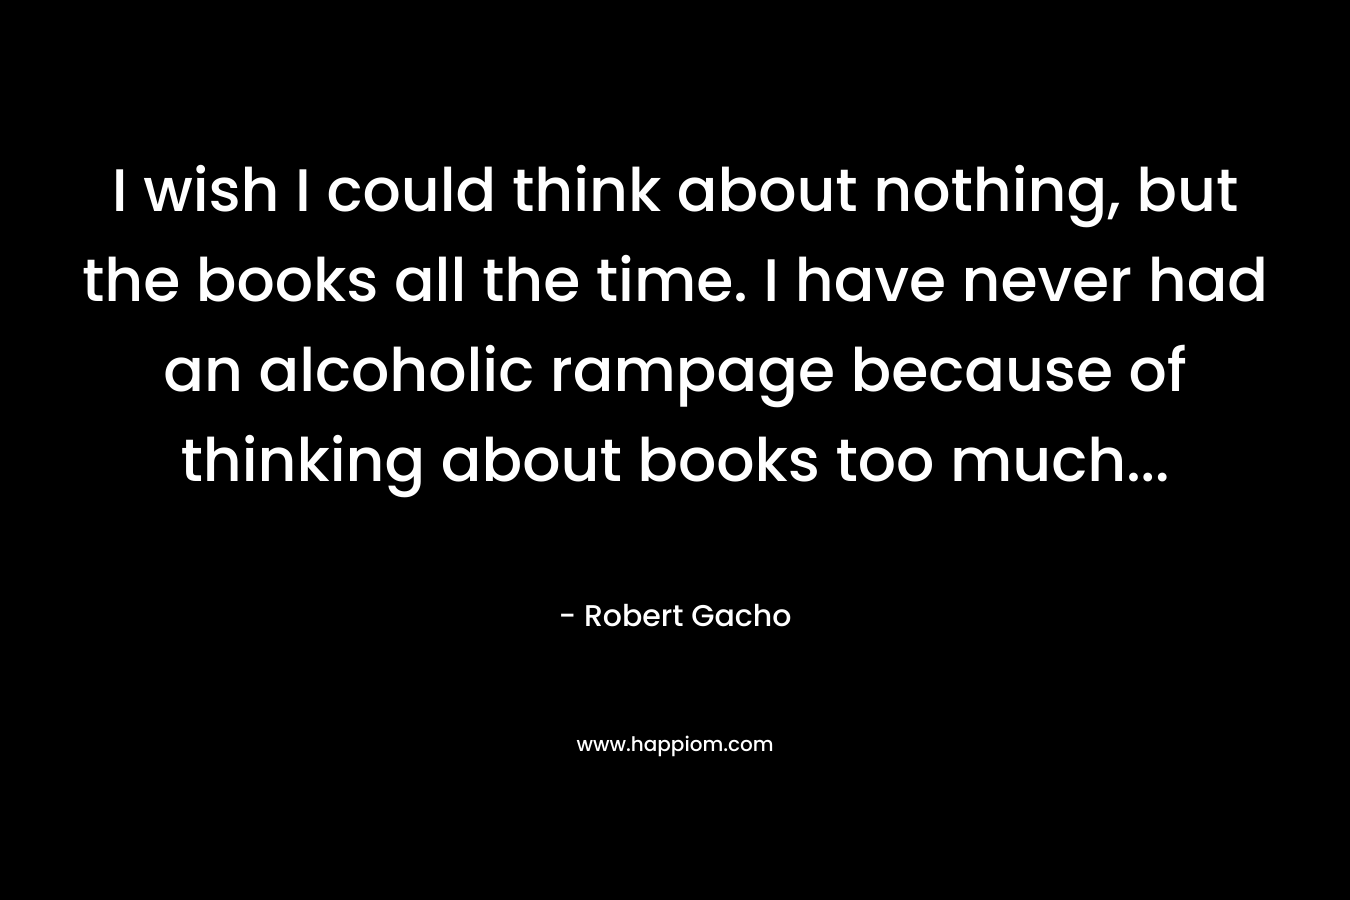 I wish I could think about nothing, but the books all the time. I have never had an alcoholic rampage because of thinking about books too much...